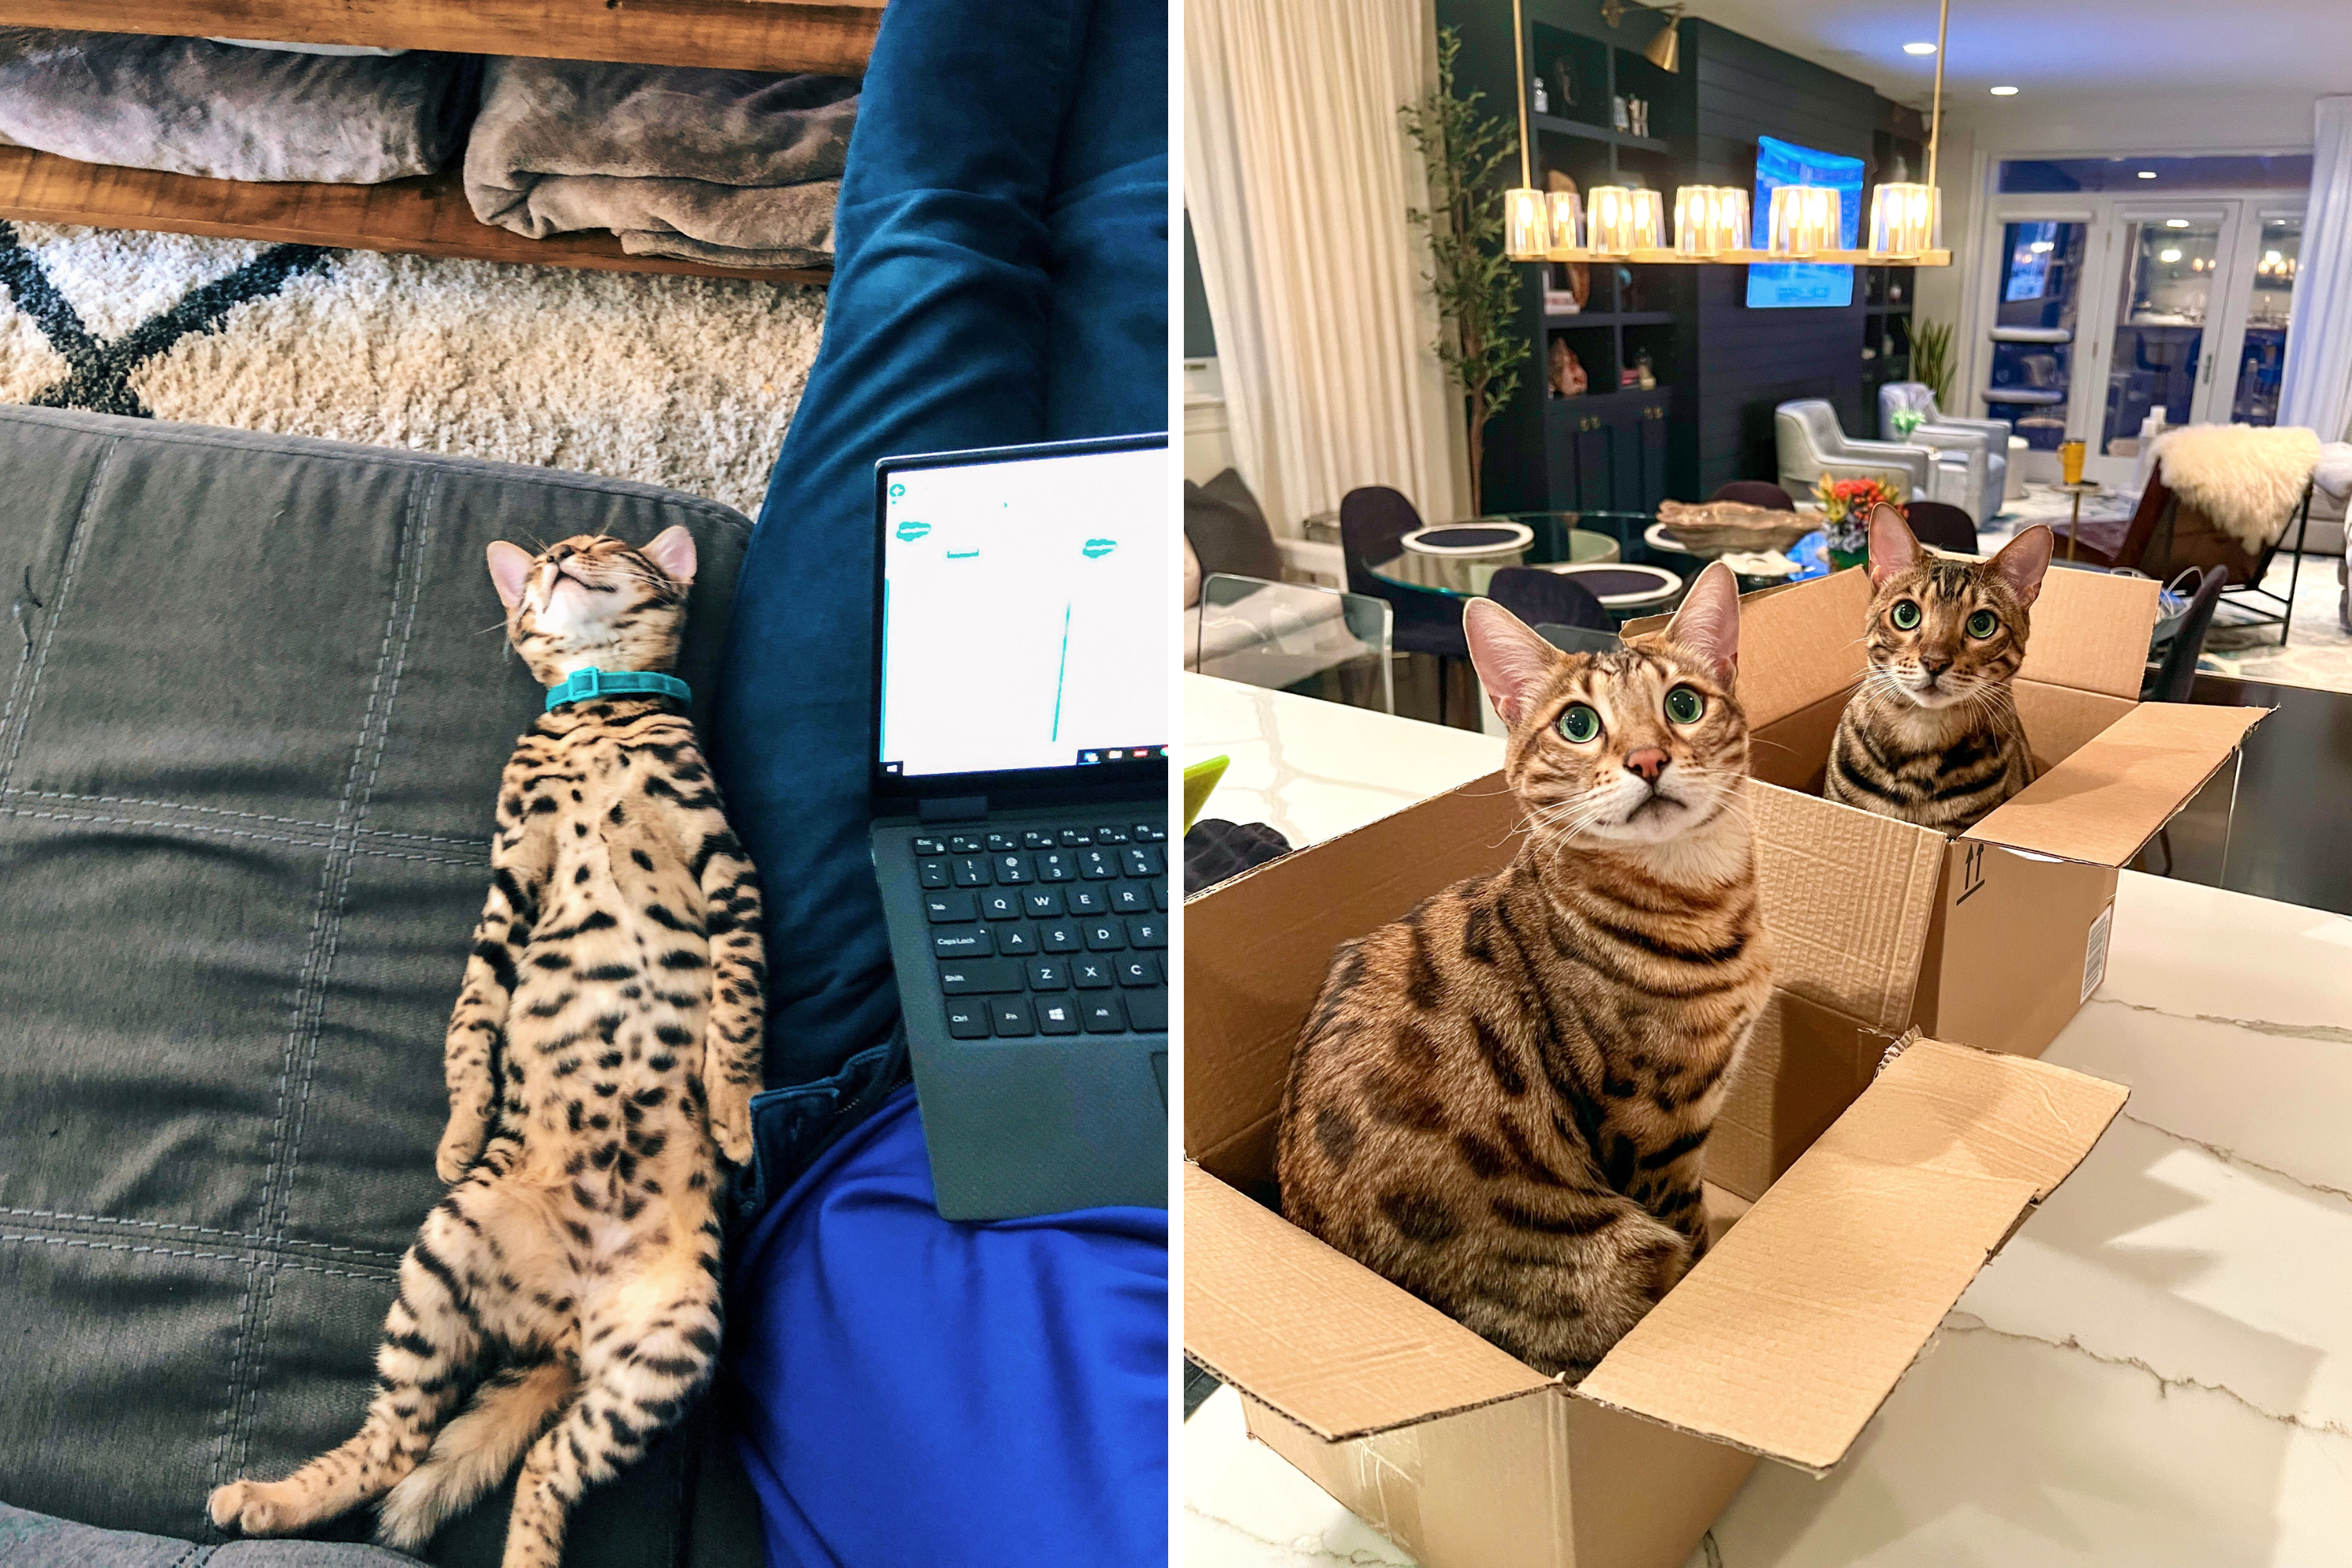 Way Bengal Cat Sleeps After Waking Up Owner at 4am Has Internet in Stitches